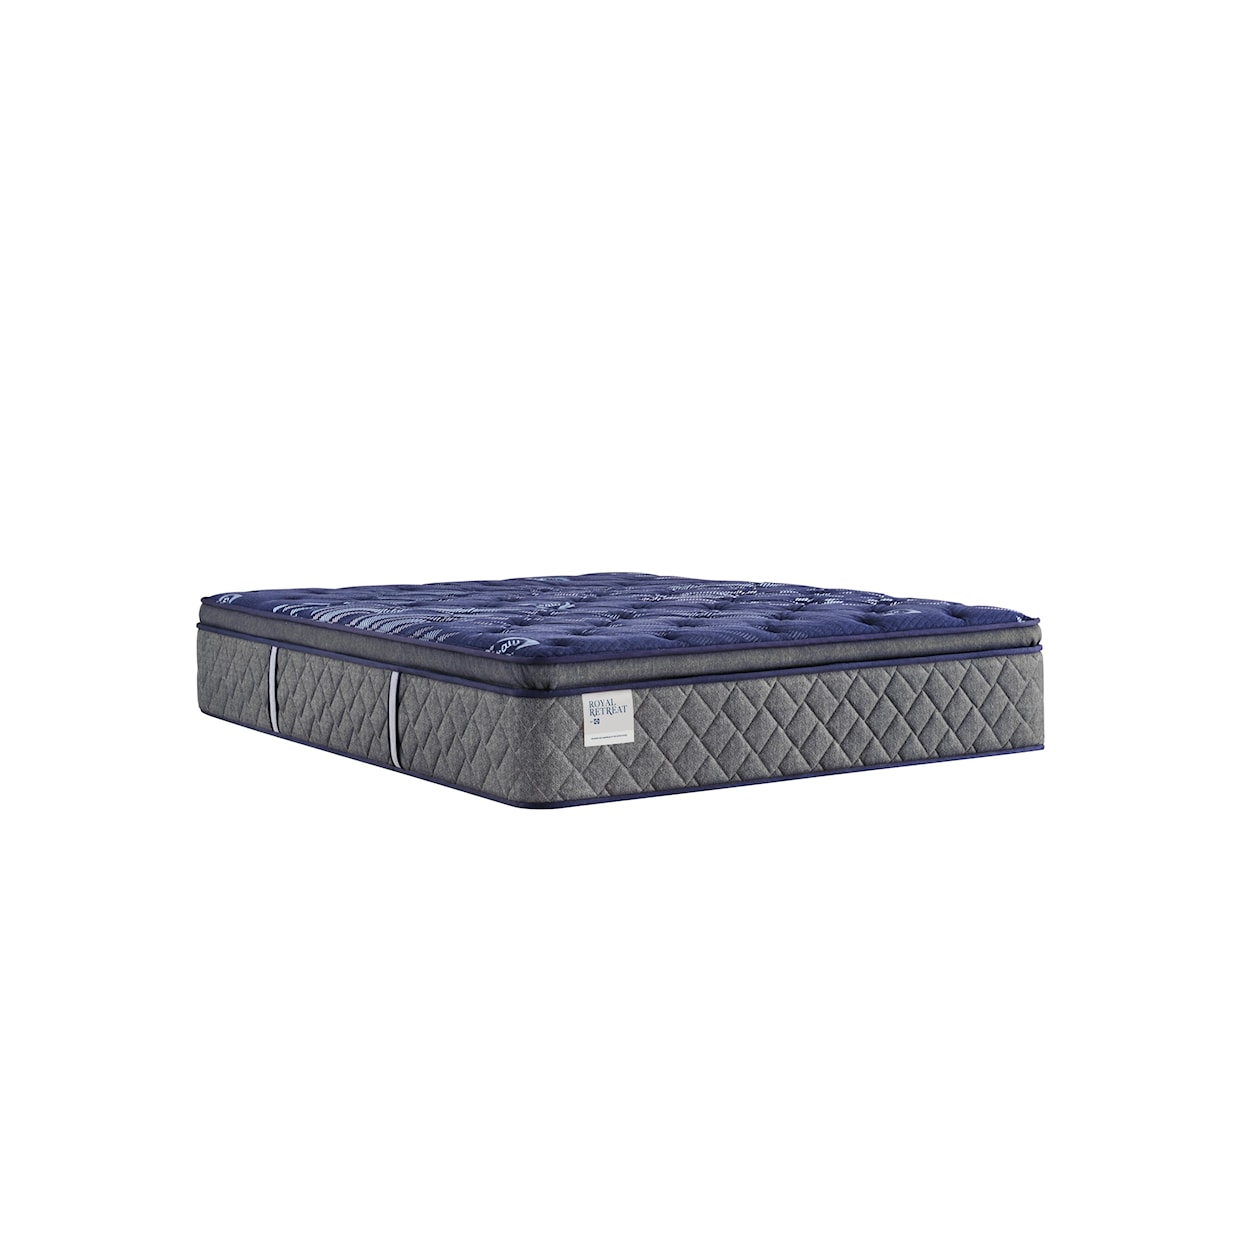 Sealy Royal Retreat S8 Queenstown  Soft EPT Double Mattress